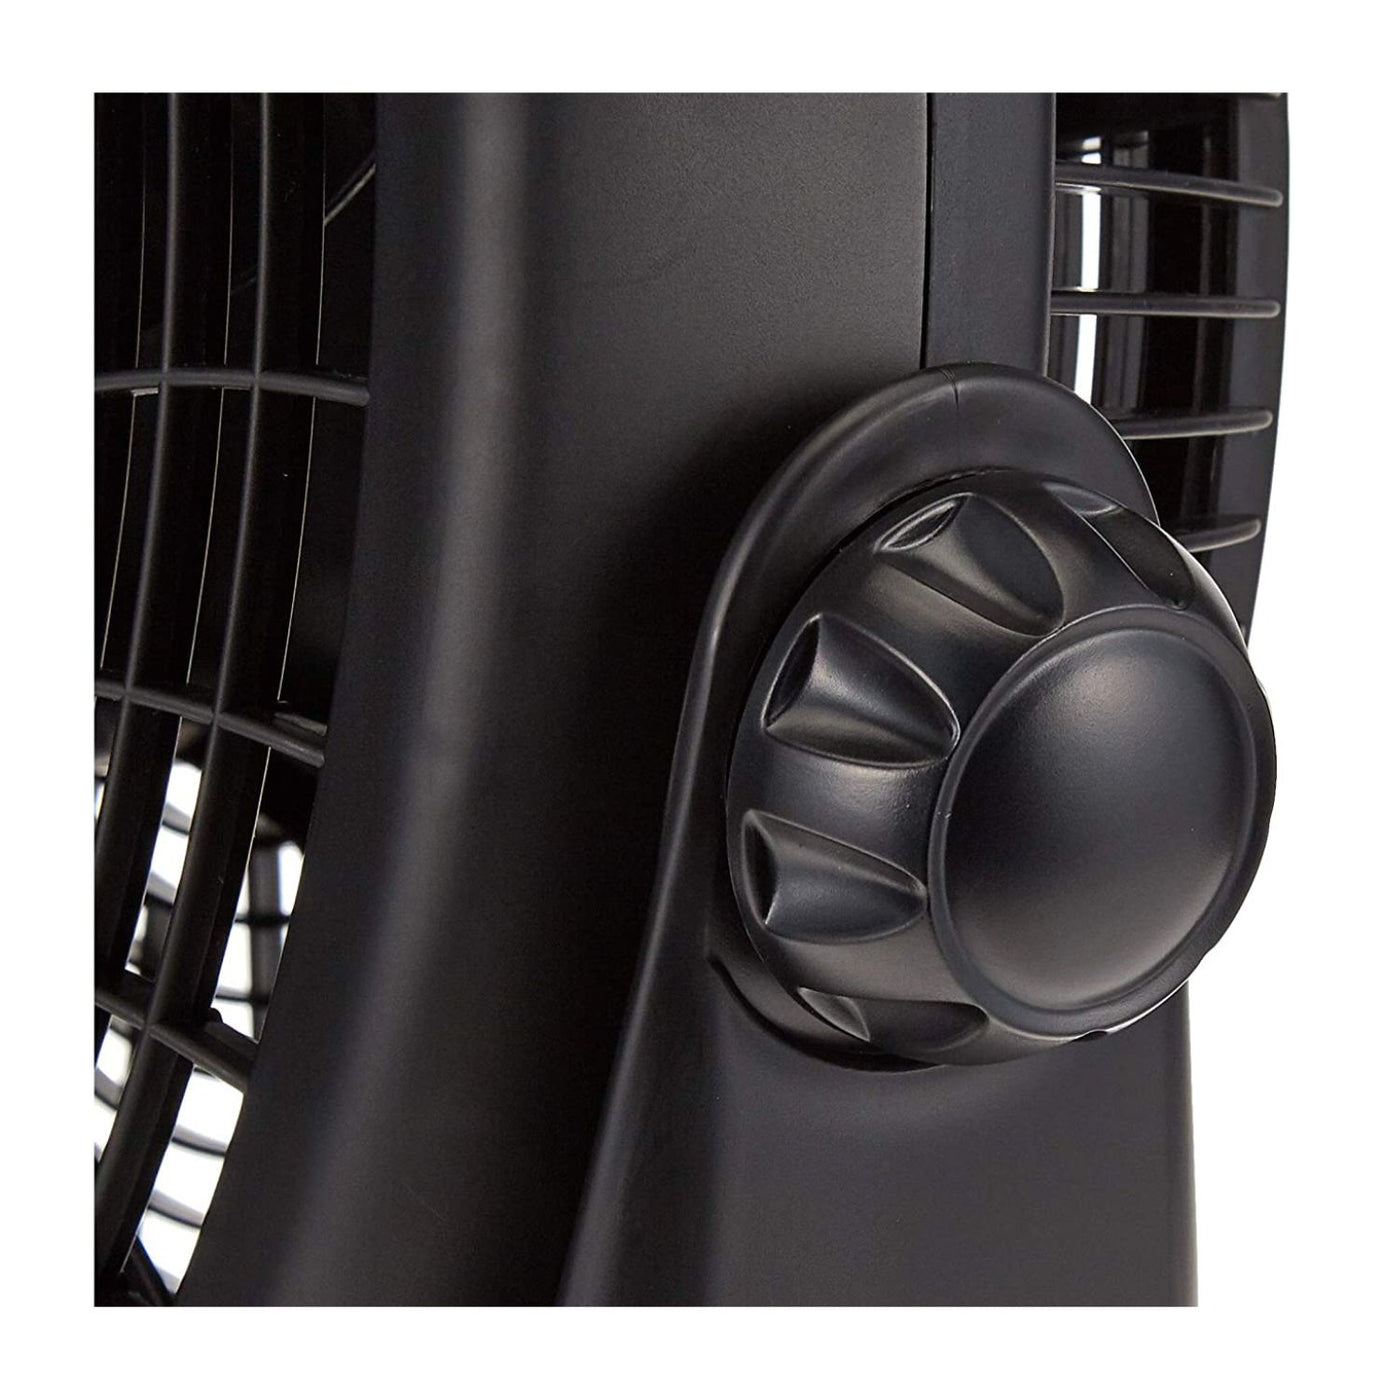 Box fan with 3 Speed control, sturdy base and Adjustable Swivel - 16 inch Compact design FB1620-B5 Black